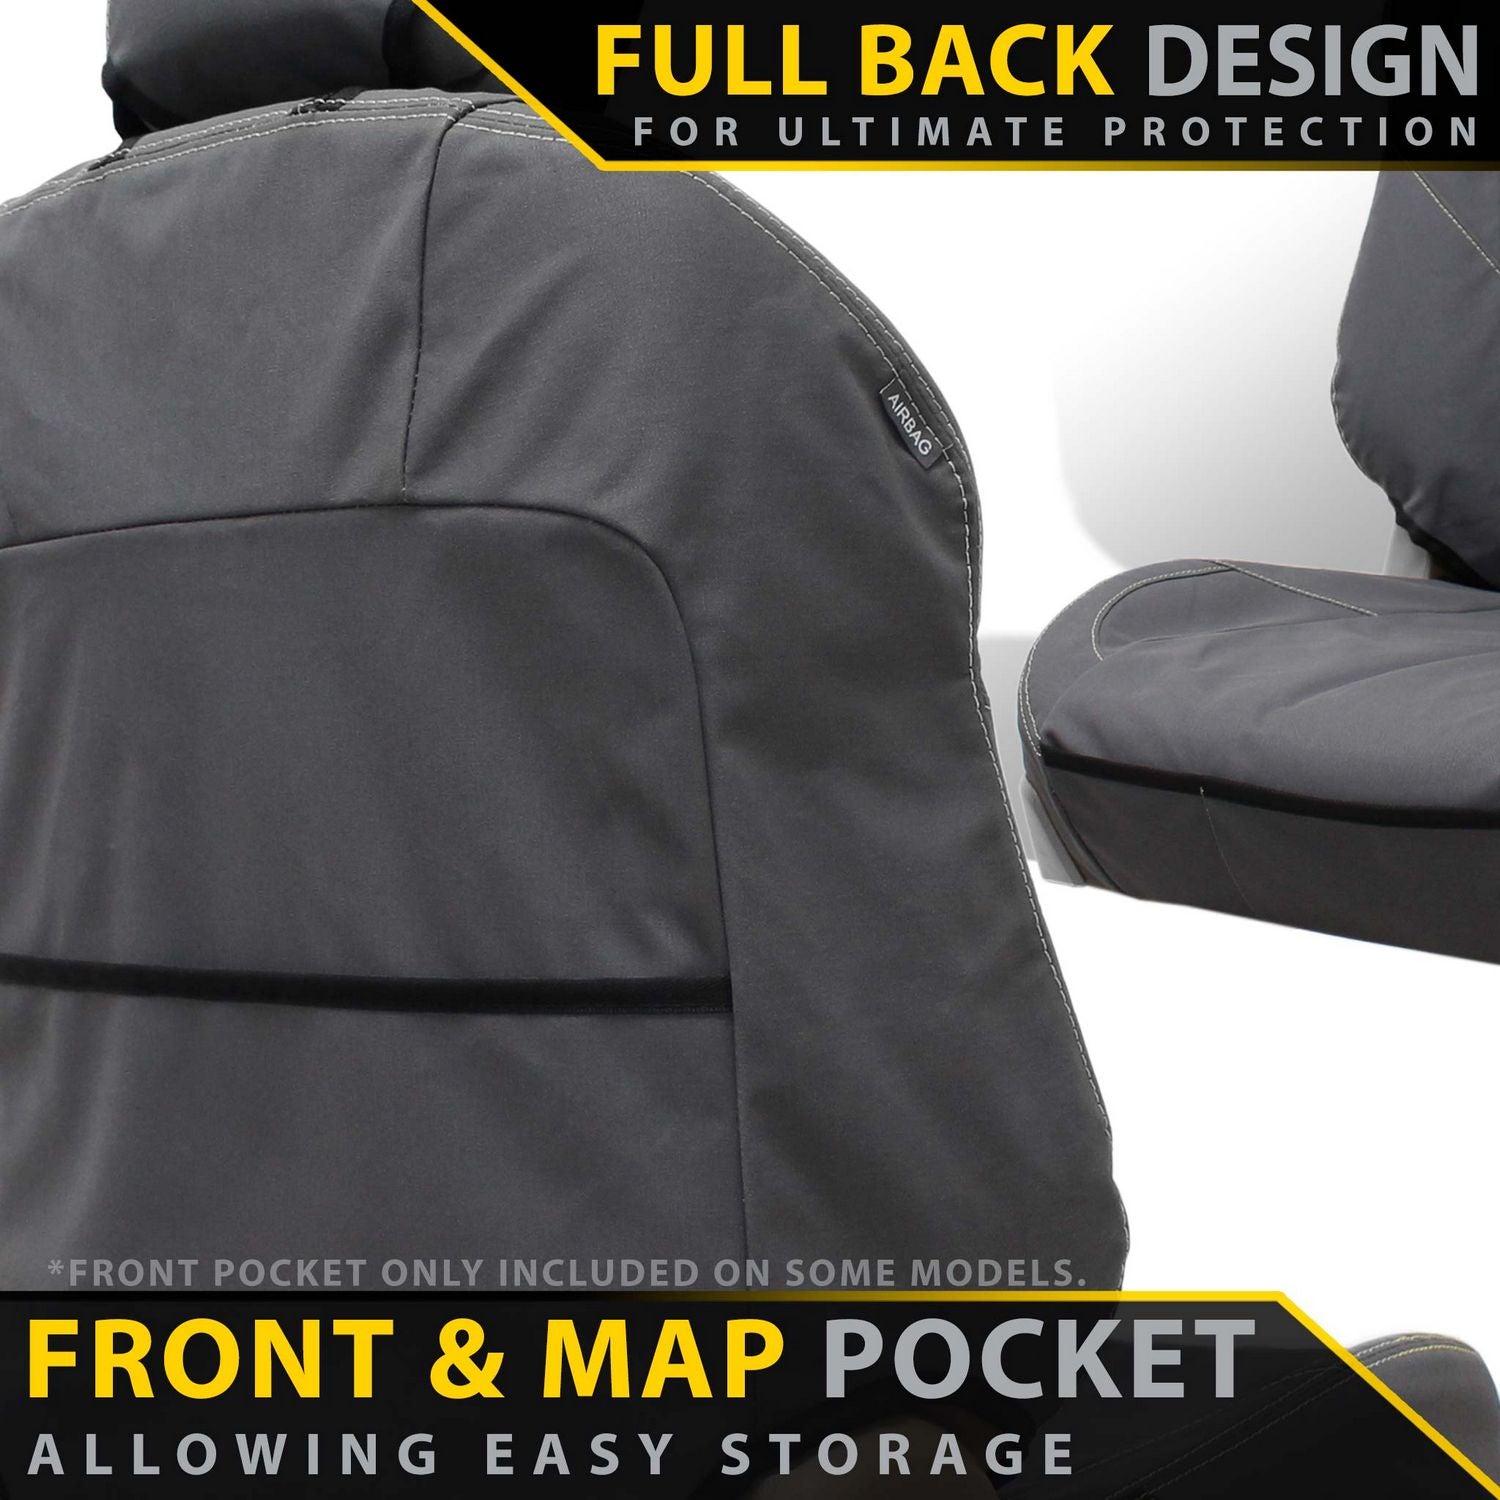 Toyota Landcruiser 79 Series Dual Cab XP6 Tough Canvas 2x Front Seat Covers (In Stock)